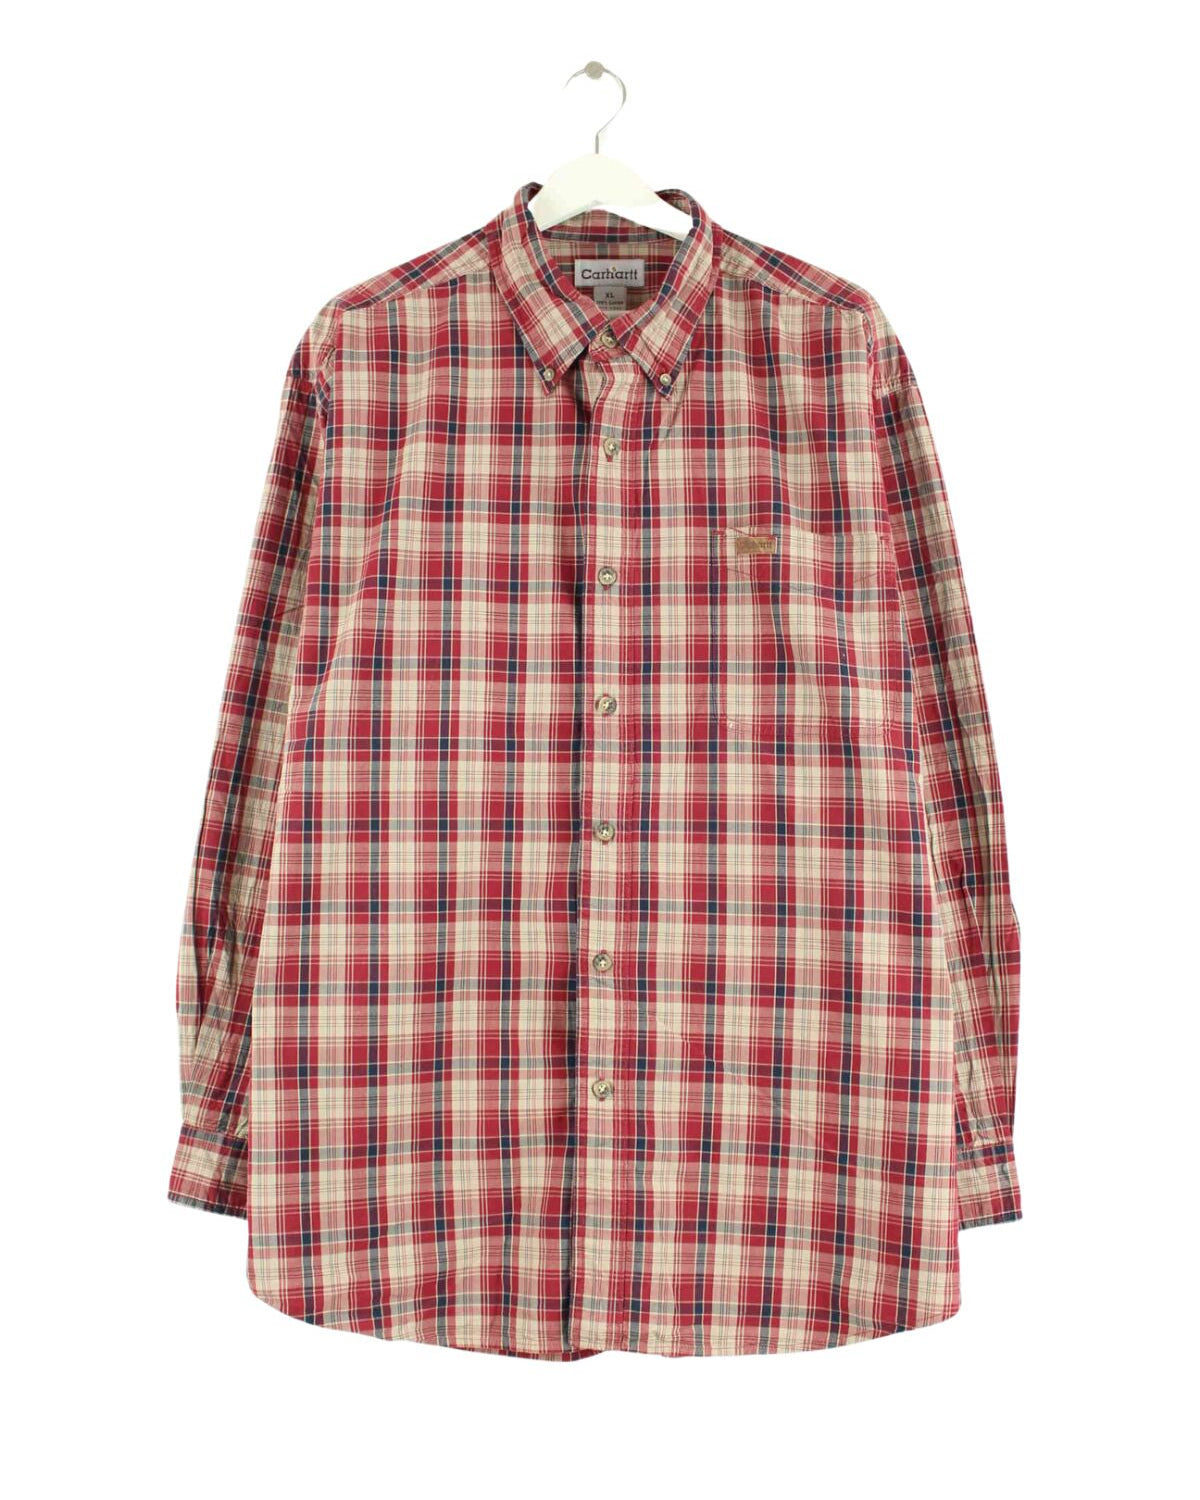 Carhartt Checked Hemd Rot XL (front image)